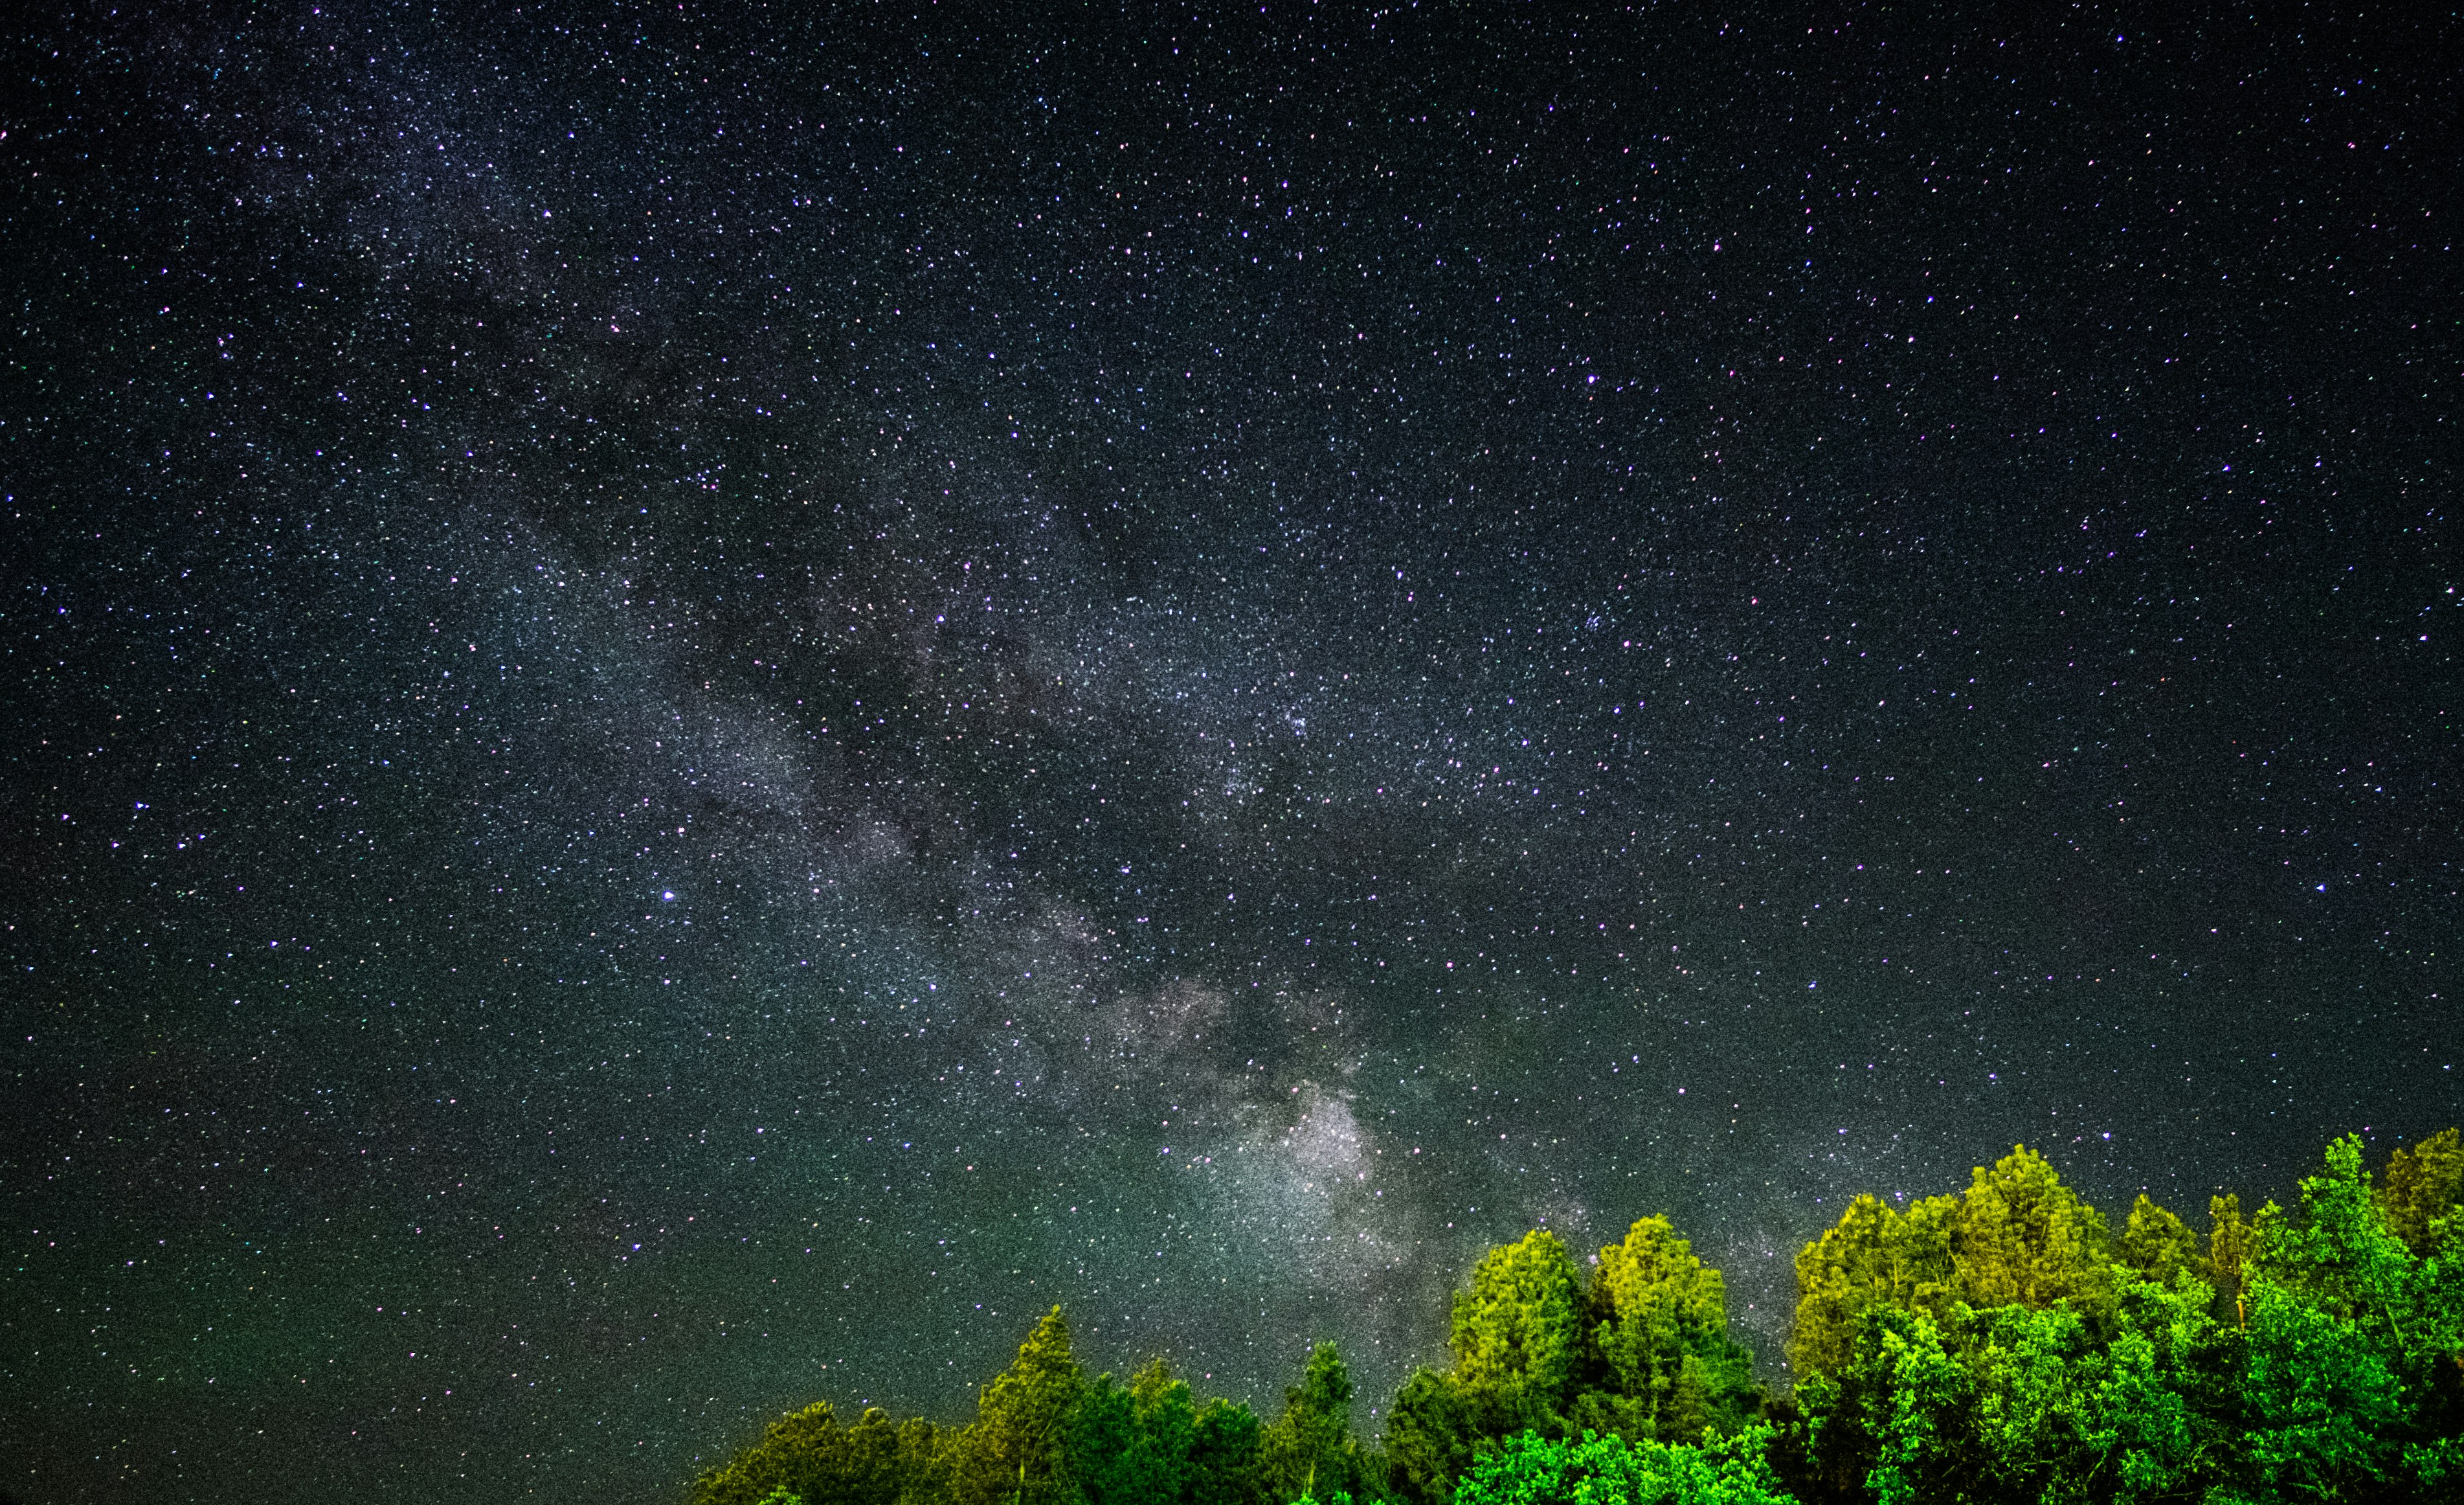 Milky Way Galaxy can be seen through tree leaves